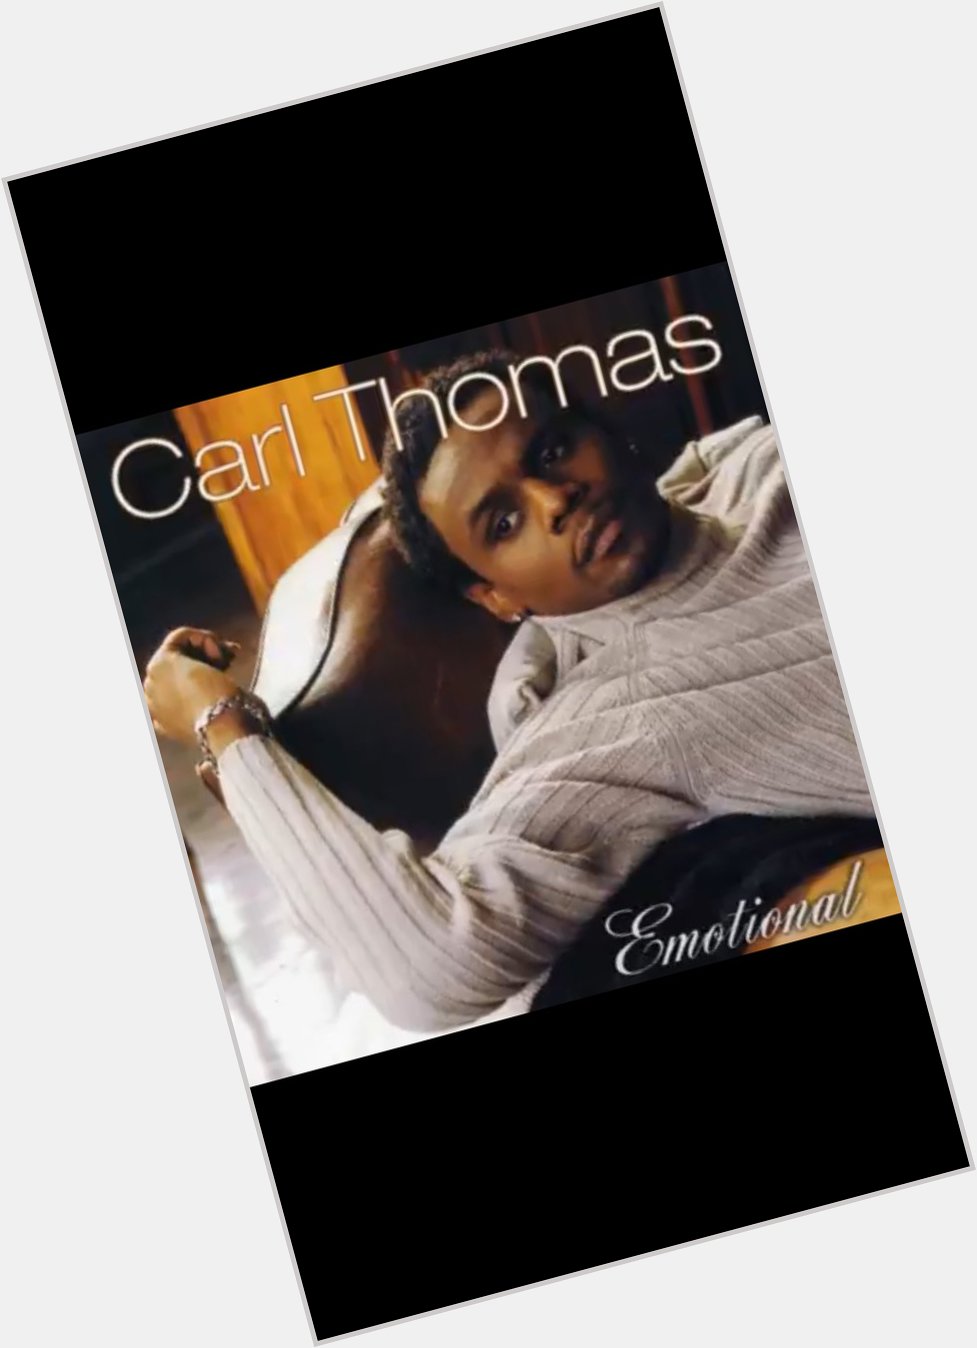  Happy Birthday Carl Thomas            This is my favorite song 